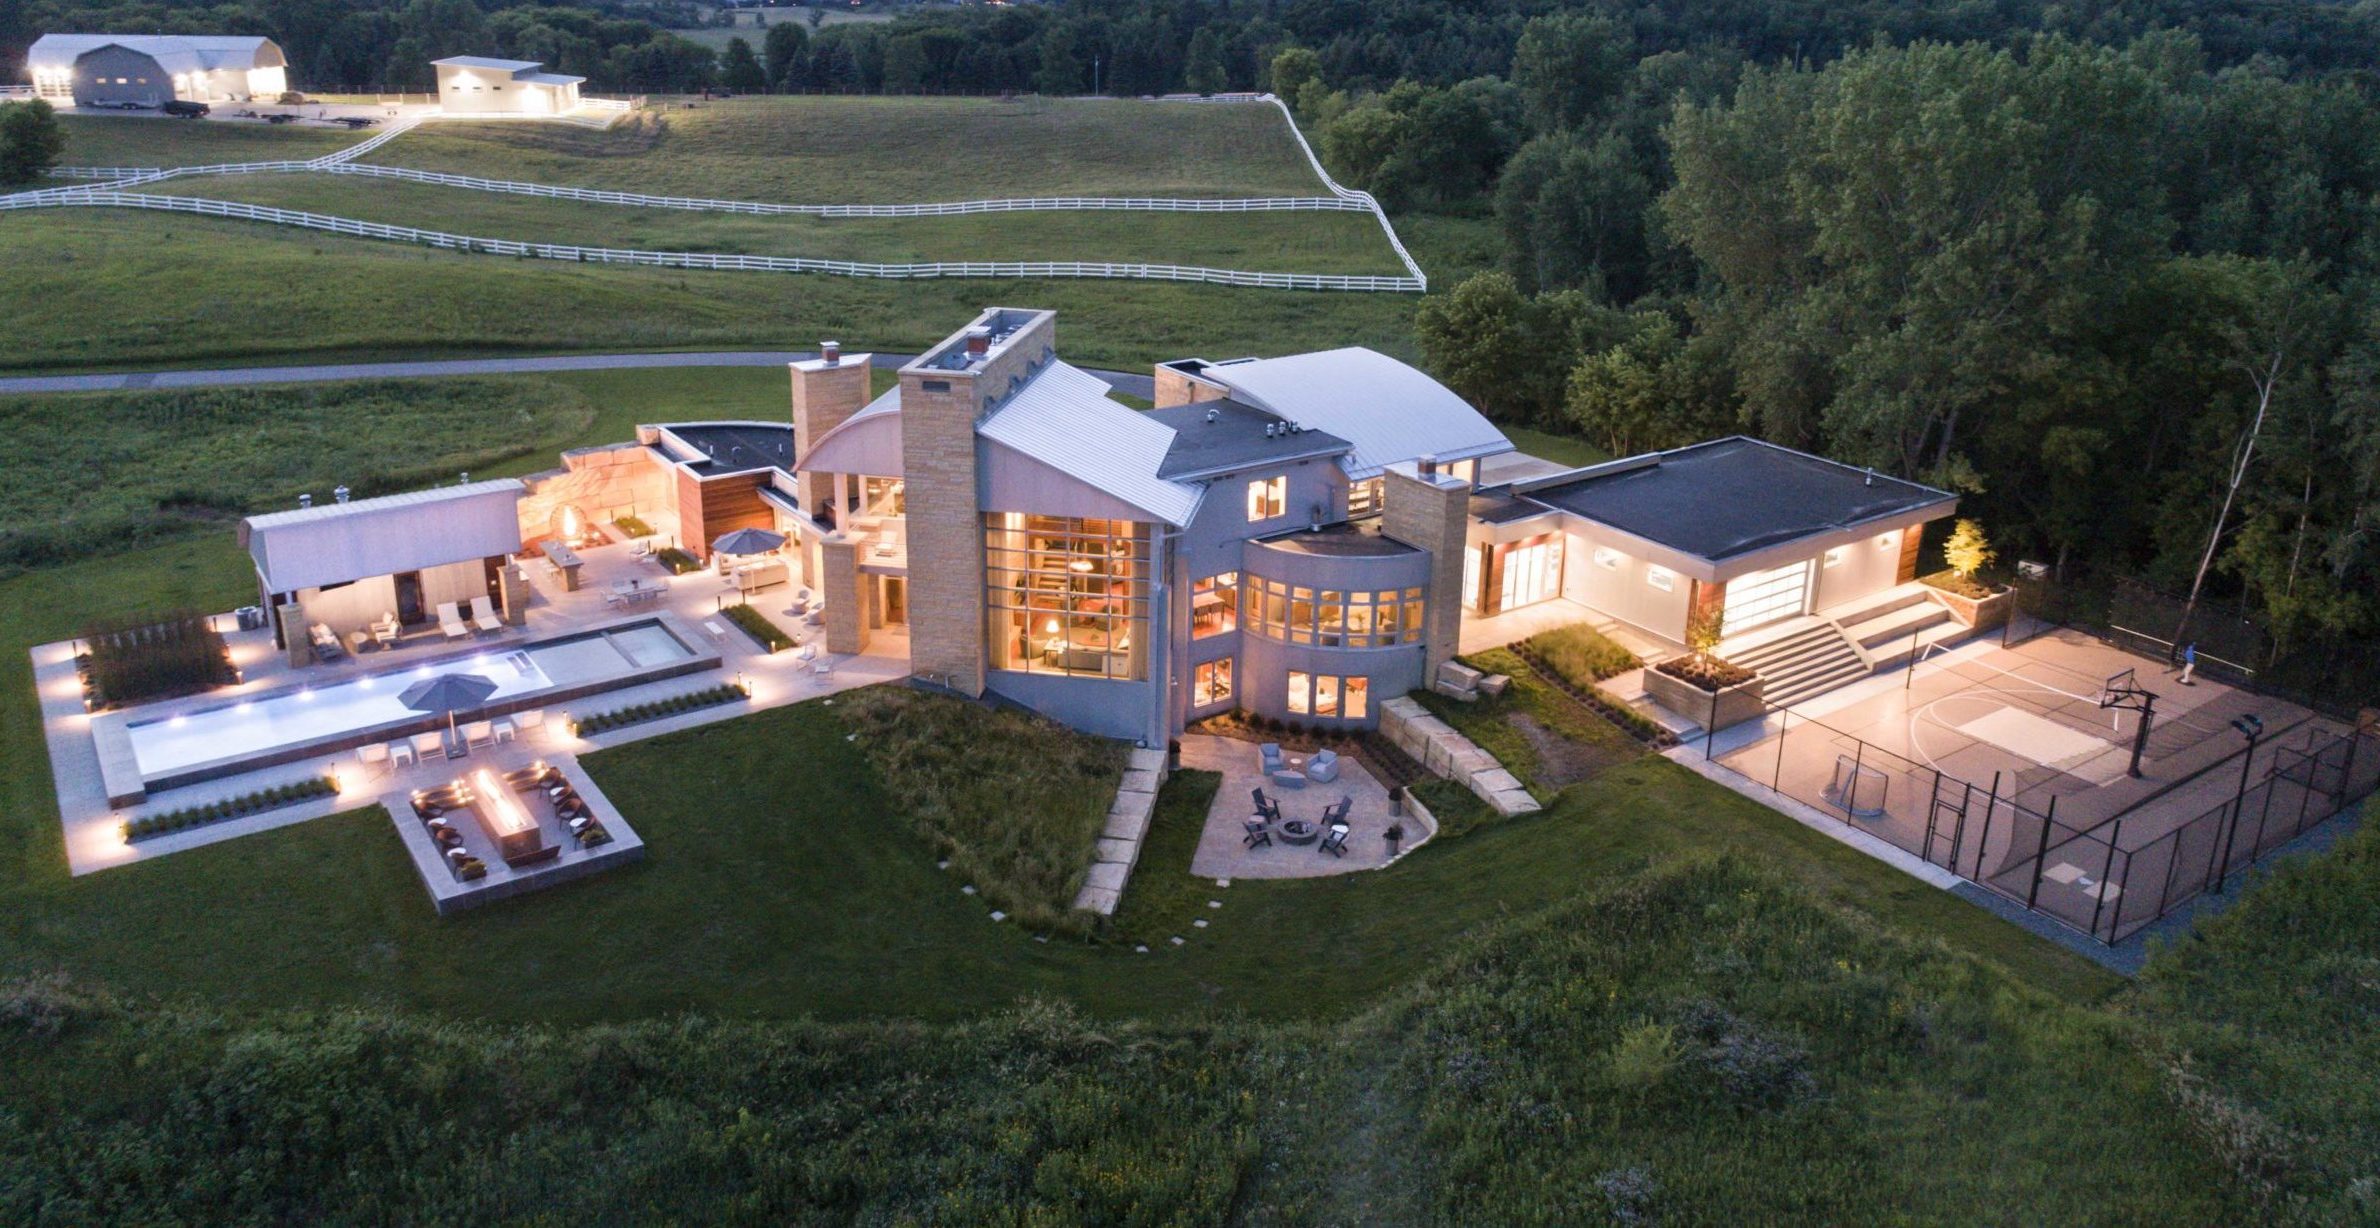 A contemporary farmhouse nestled in the countryside, captured beautifully from an aerial perspective.